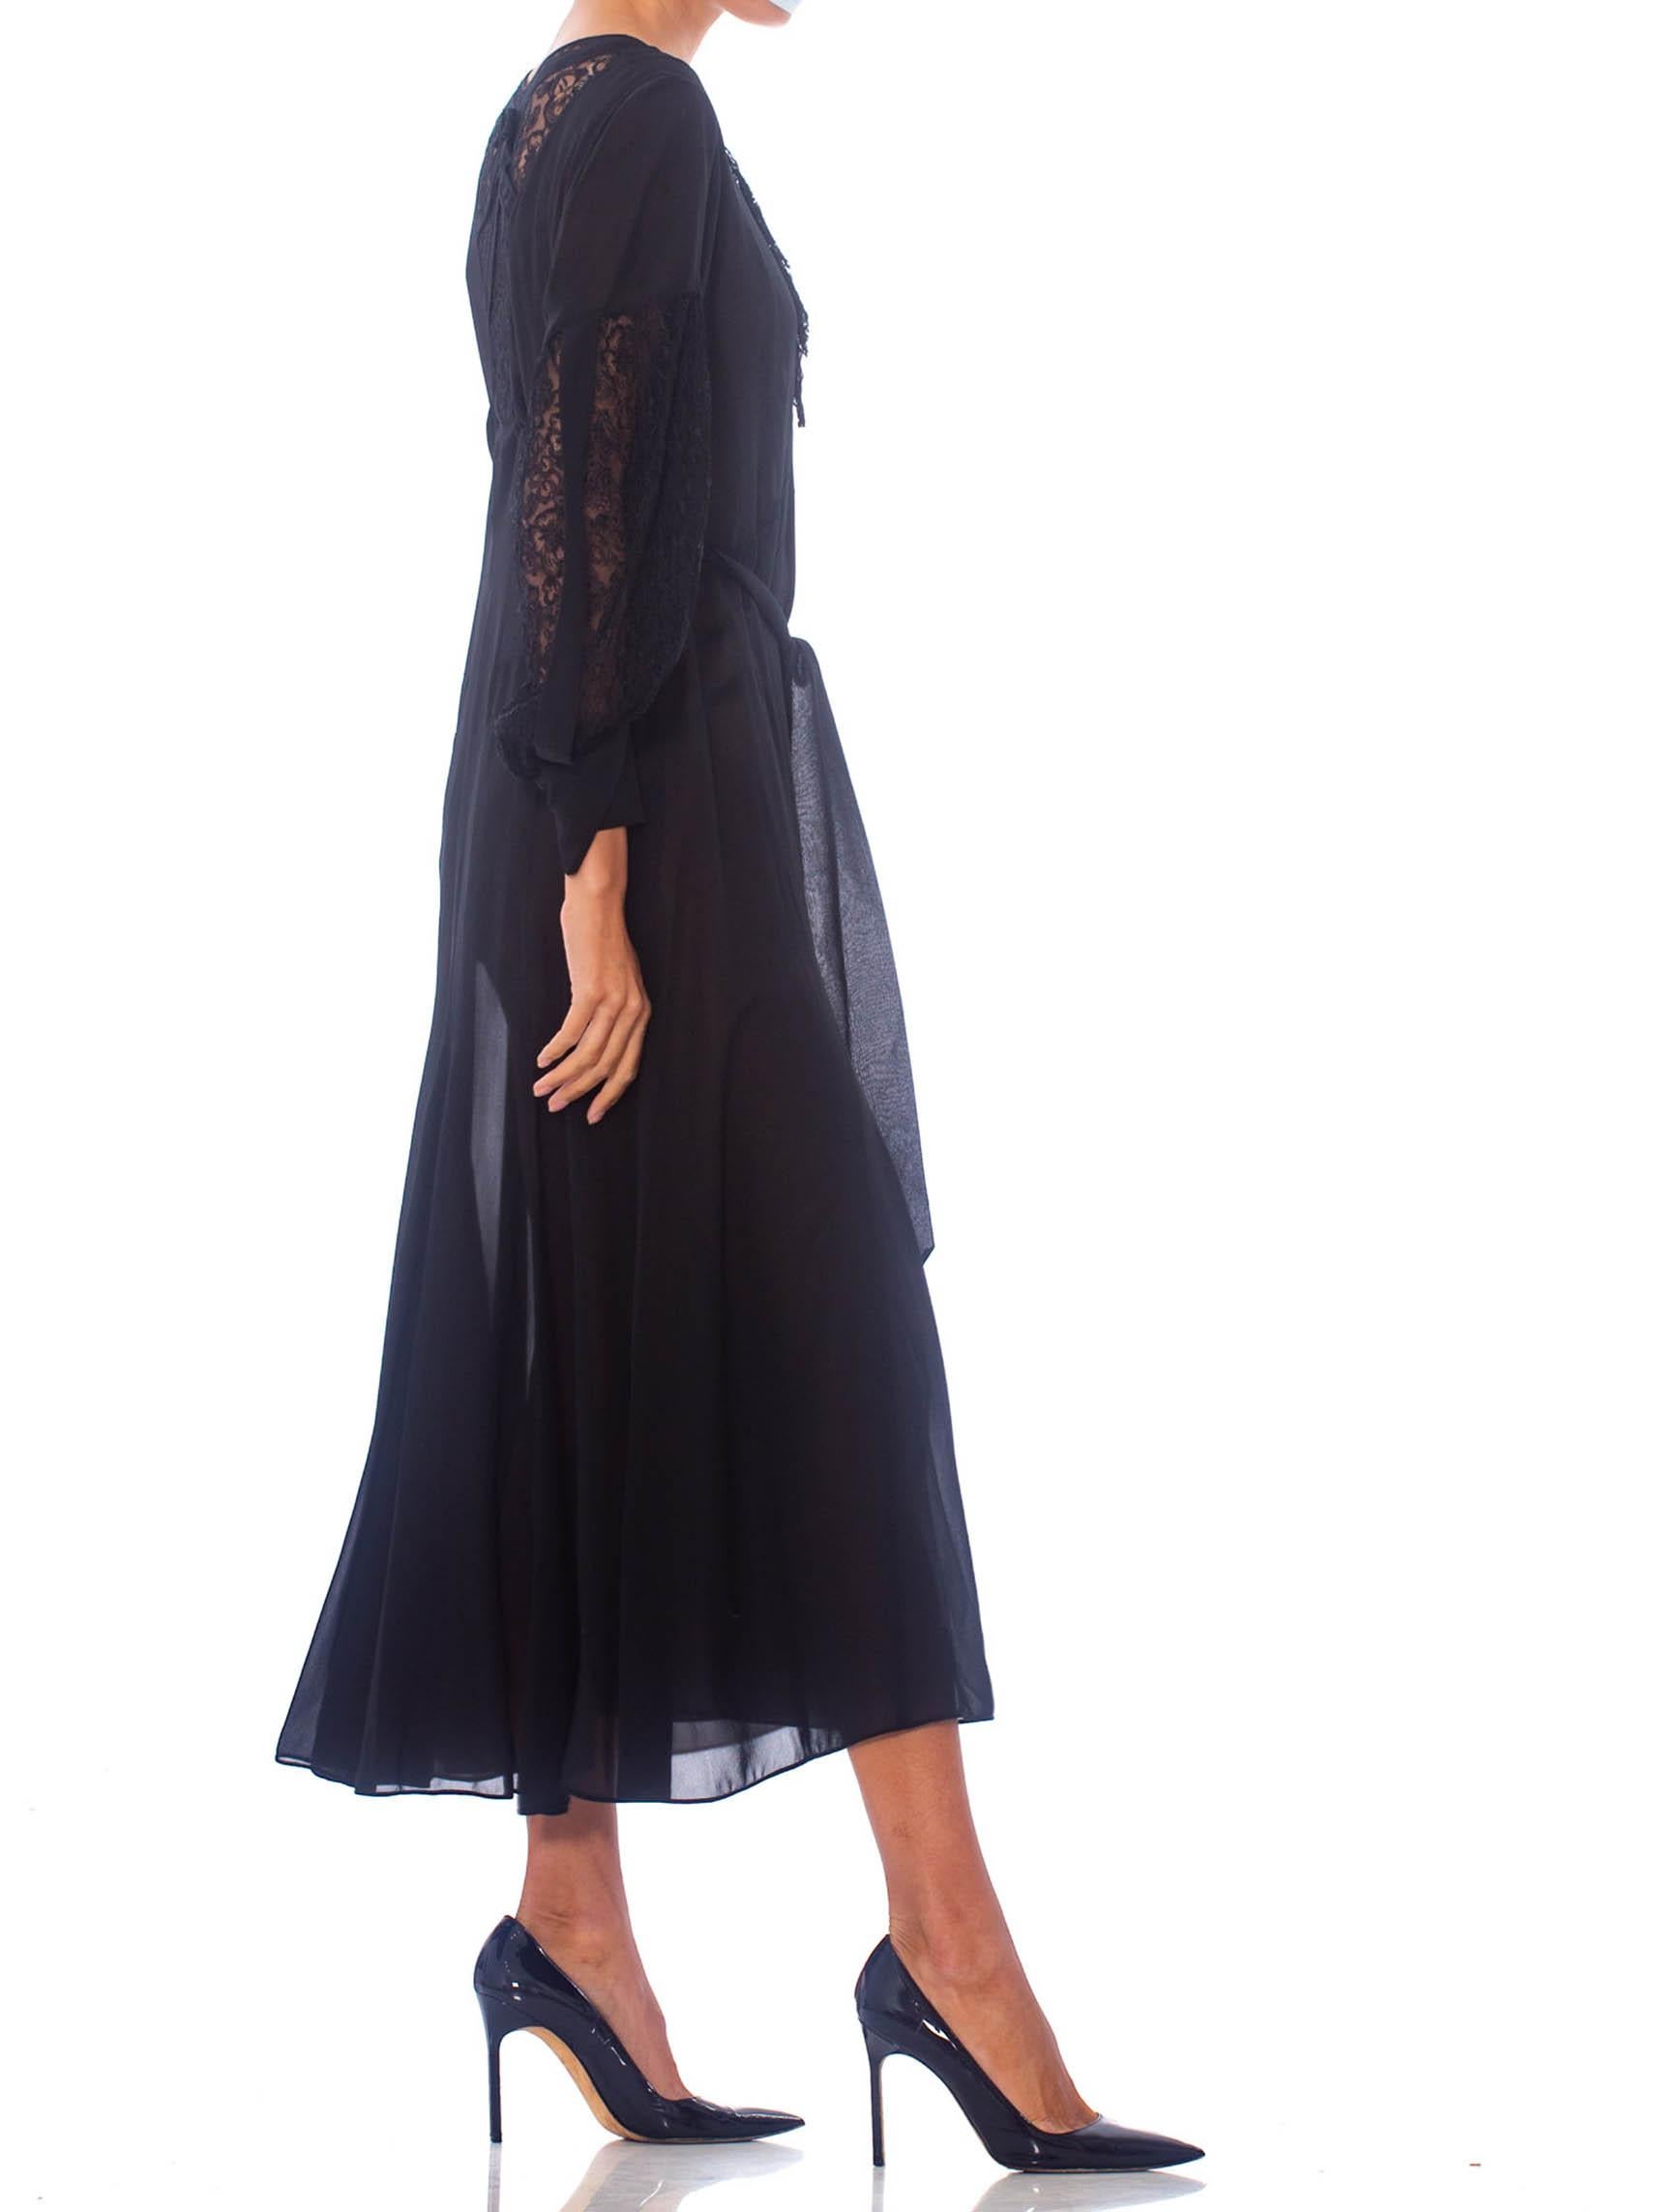 1930S Black Silk Chiffon Tie Waist Dress With Lace Inset Sleeves For Sale 1